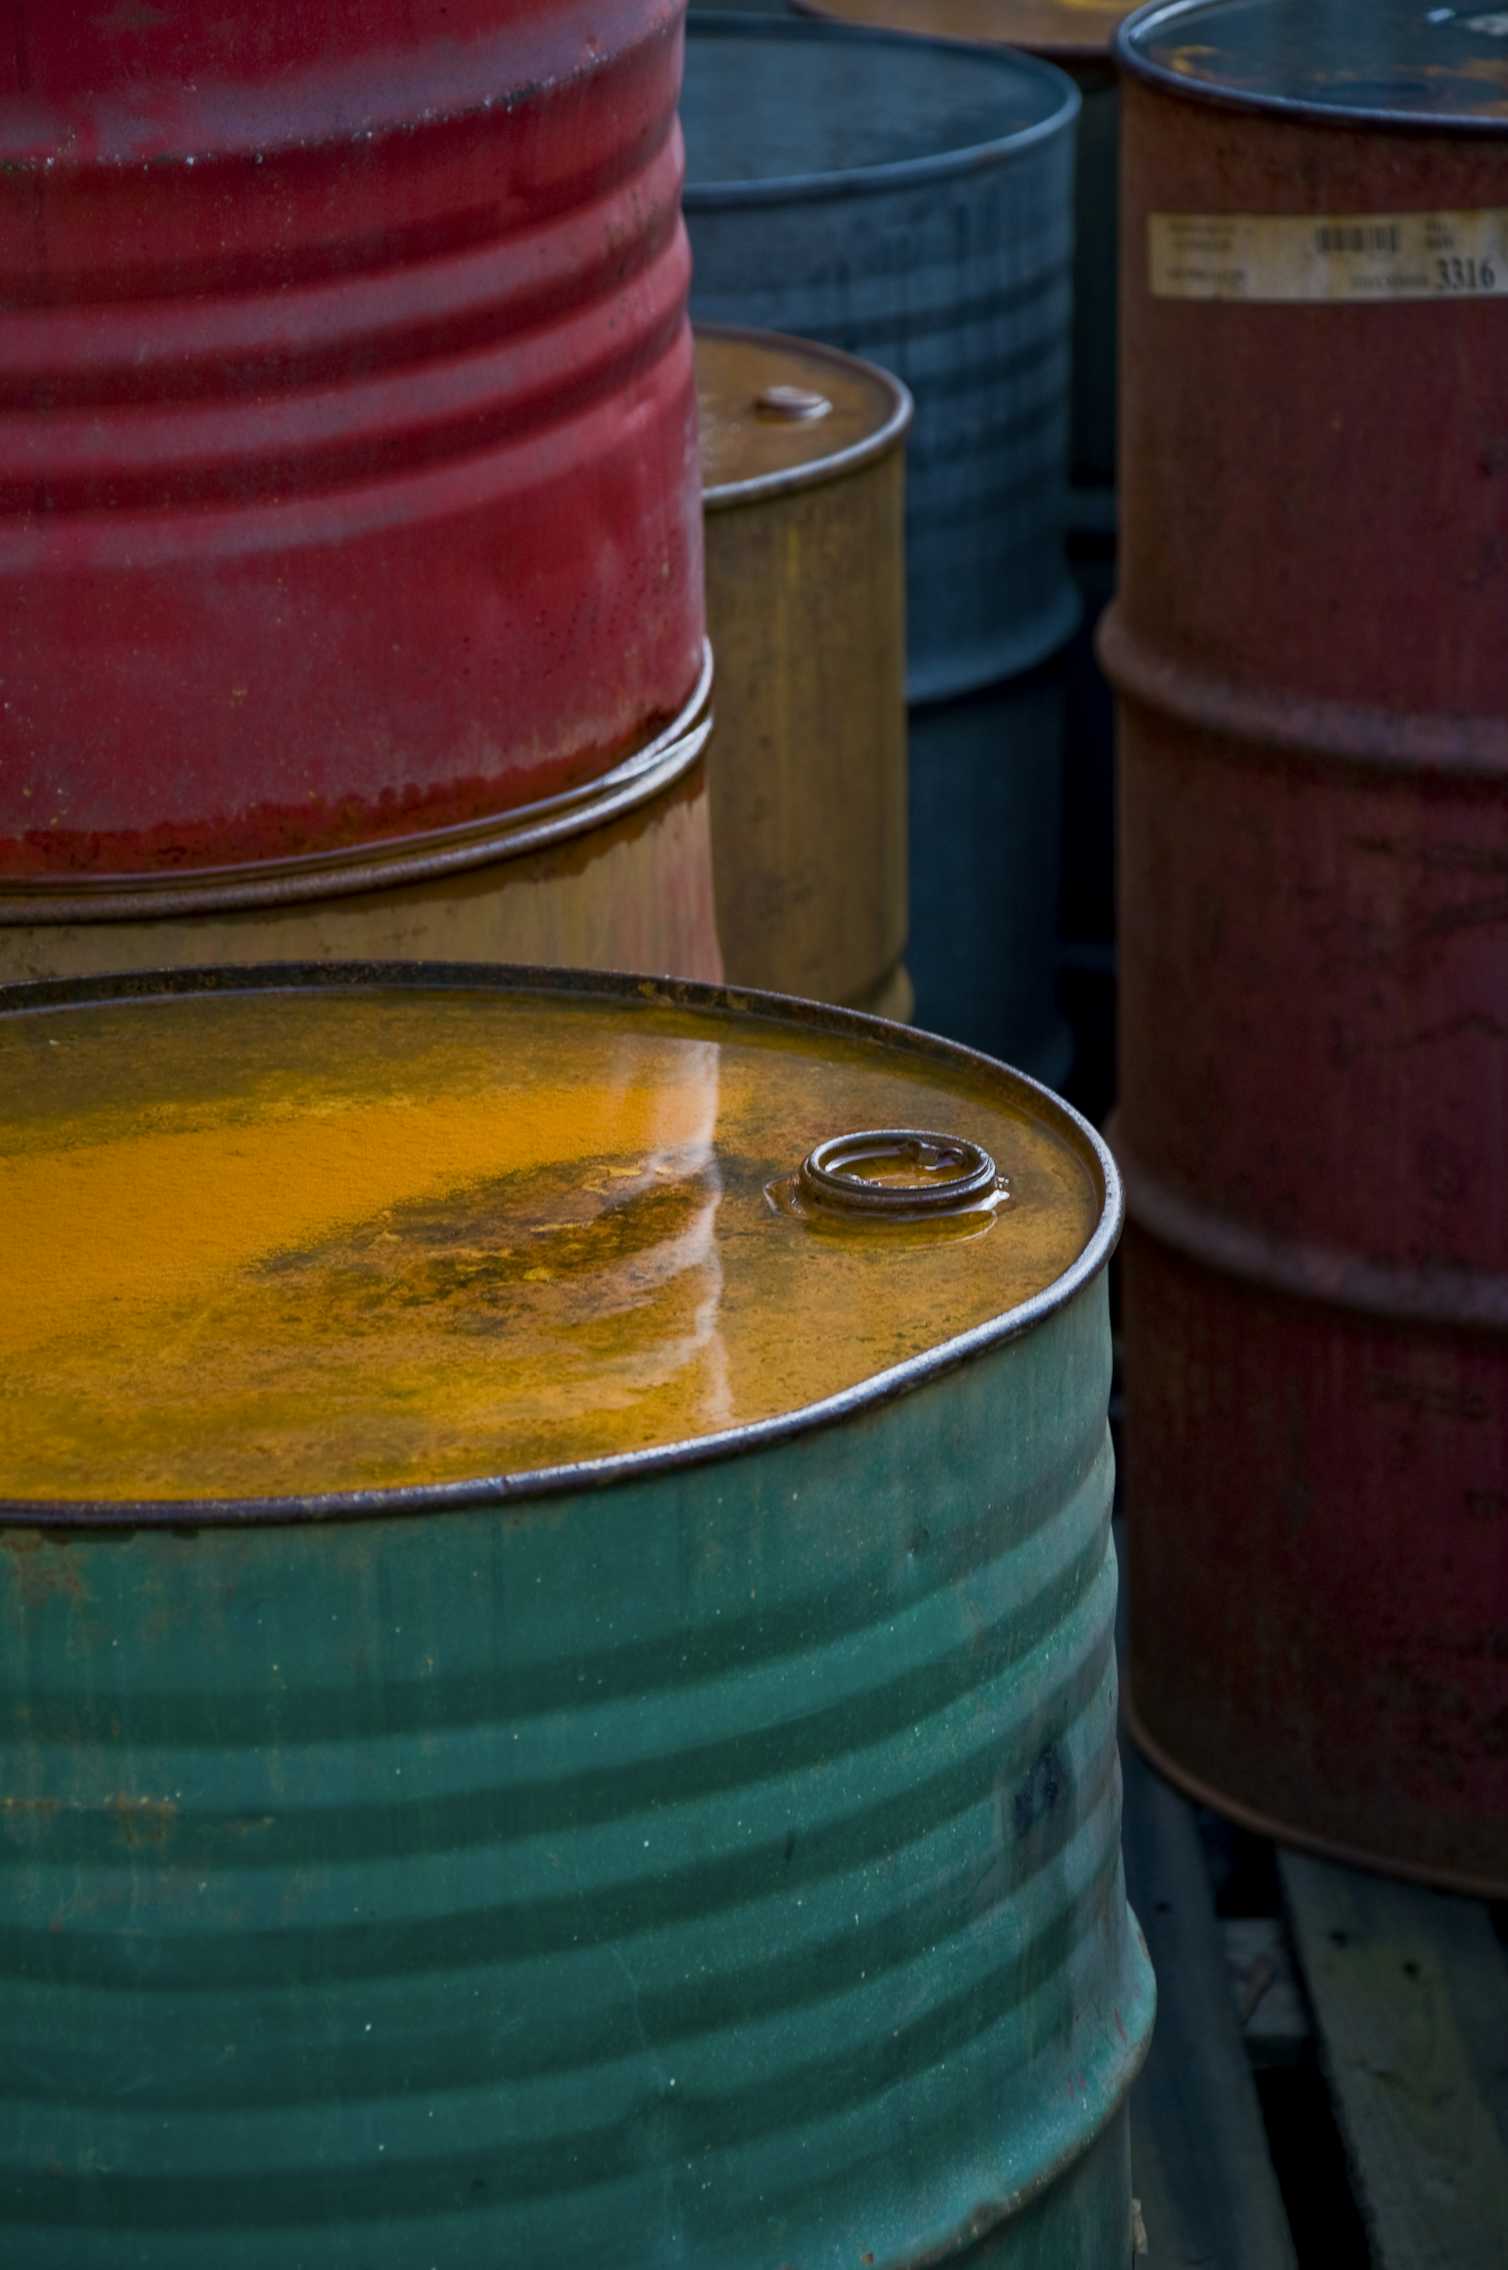 Why an 80 barrel of oil is bad